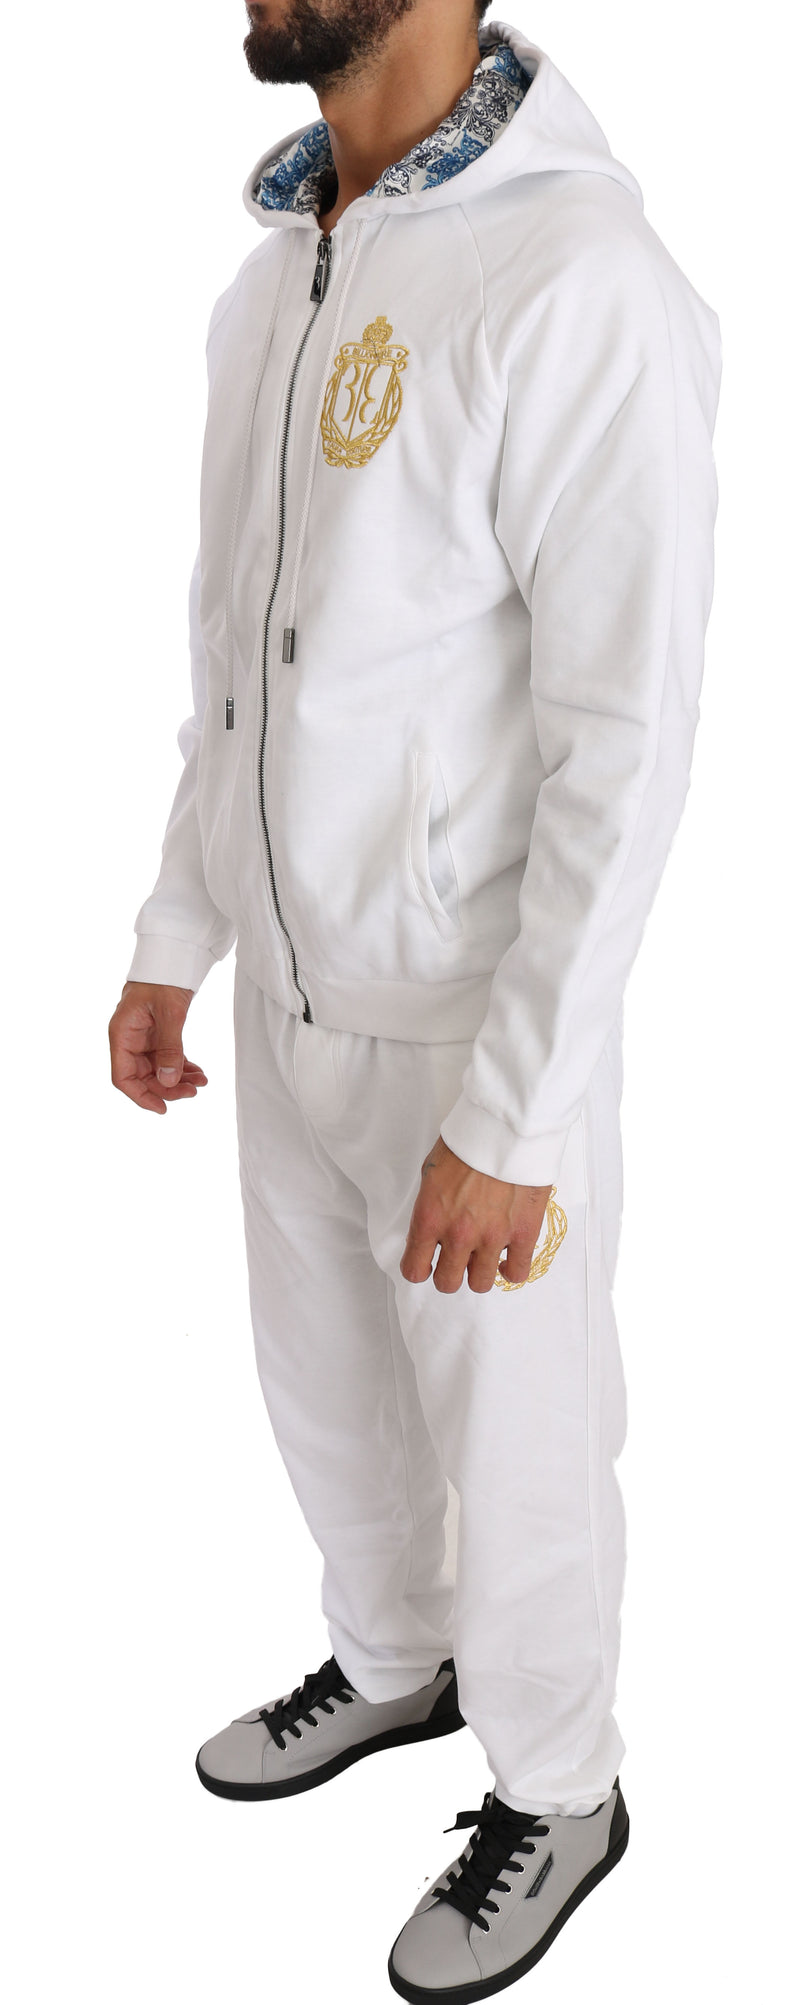 White Cotton Sweater Pants Tracksuit